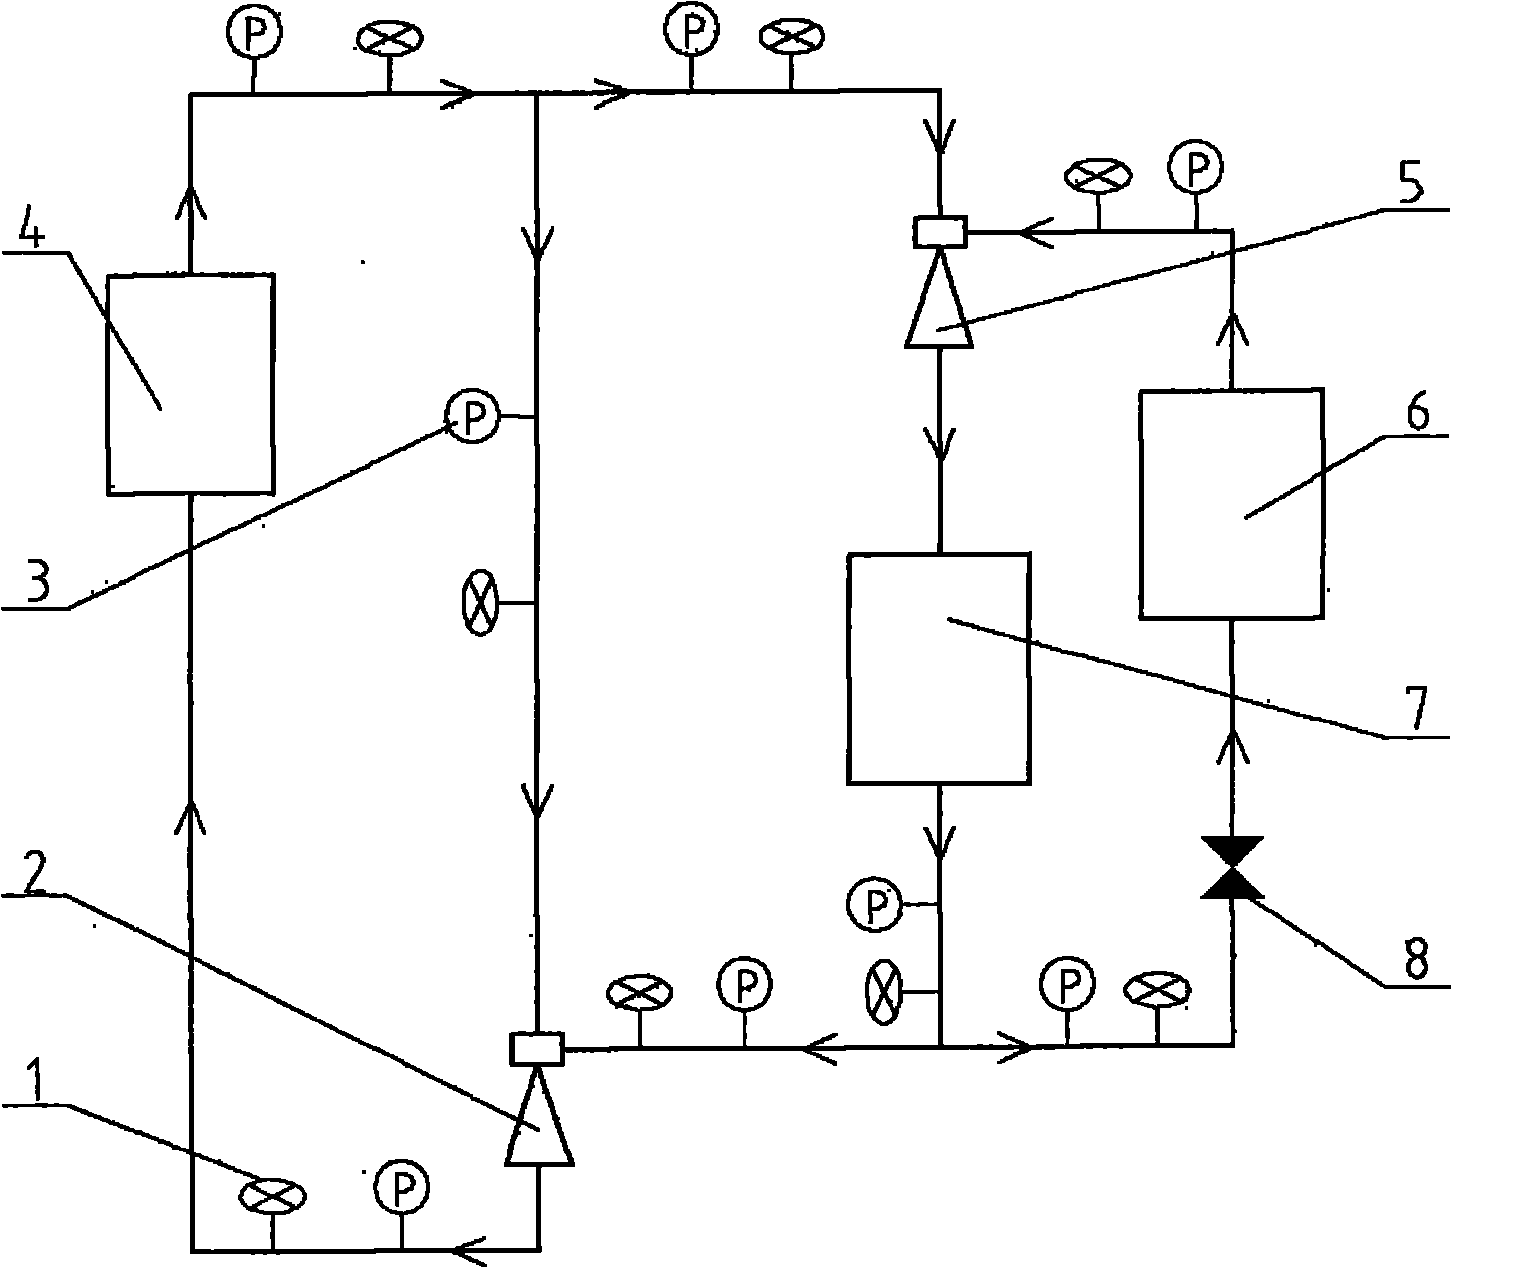 Double-jet refrigerating system